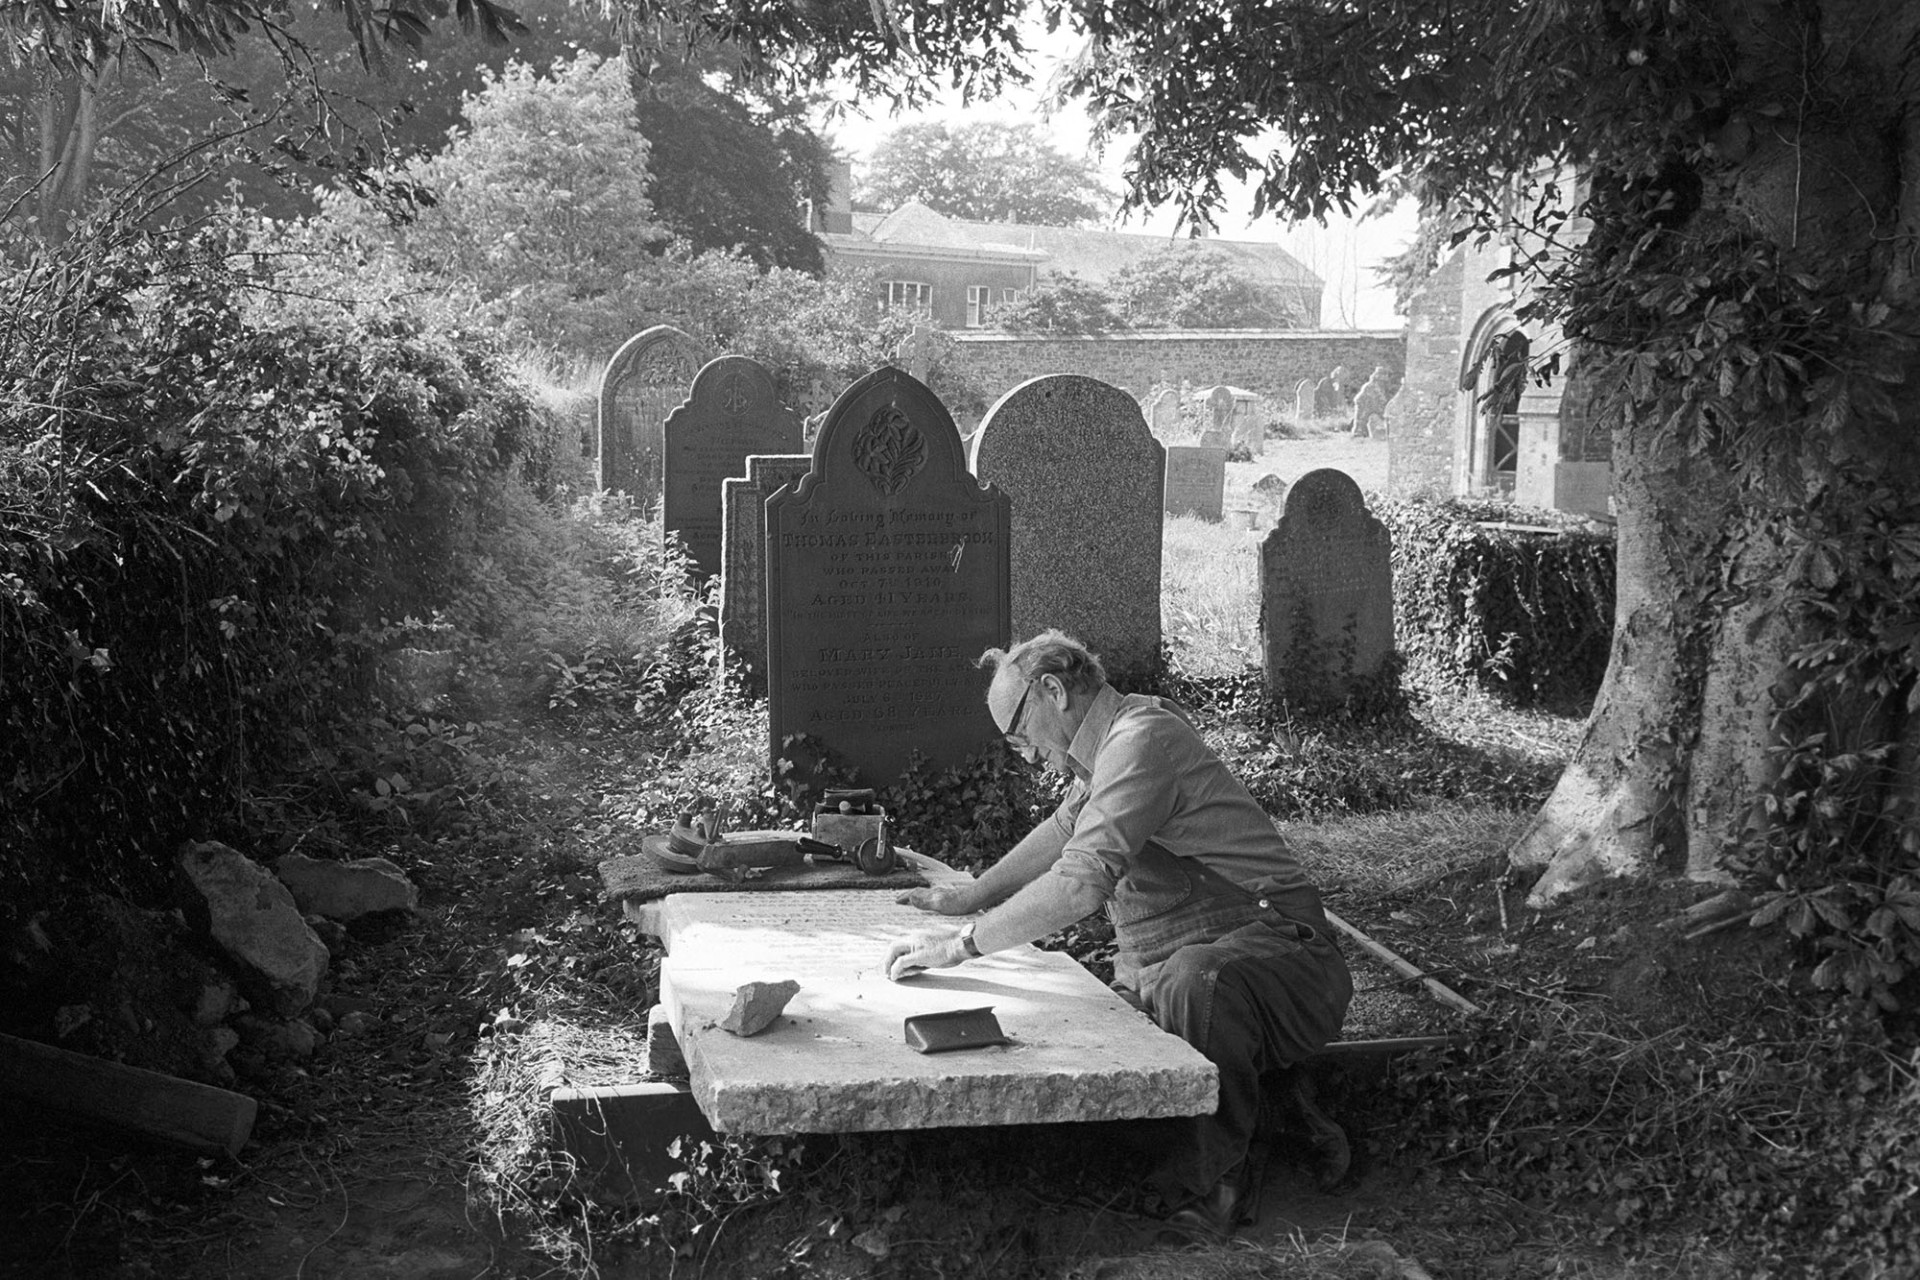 Man working on gravestone, this had been worked by his father and his boss before him. 
[Bruce Edyvean, Monumental Mason, adding an inscription to a gravestone in Beaford churchyard, under a tree. His tools, including a hand drill, are resting on the gravestone. Other gravestones and the church porch are visible in the background.]